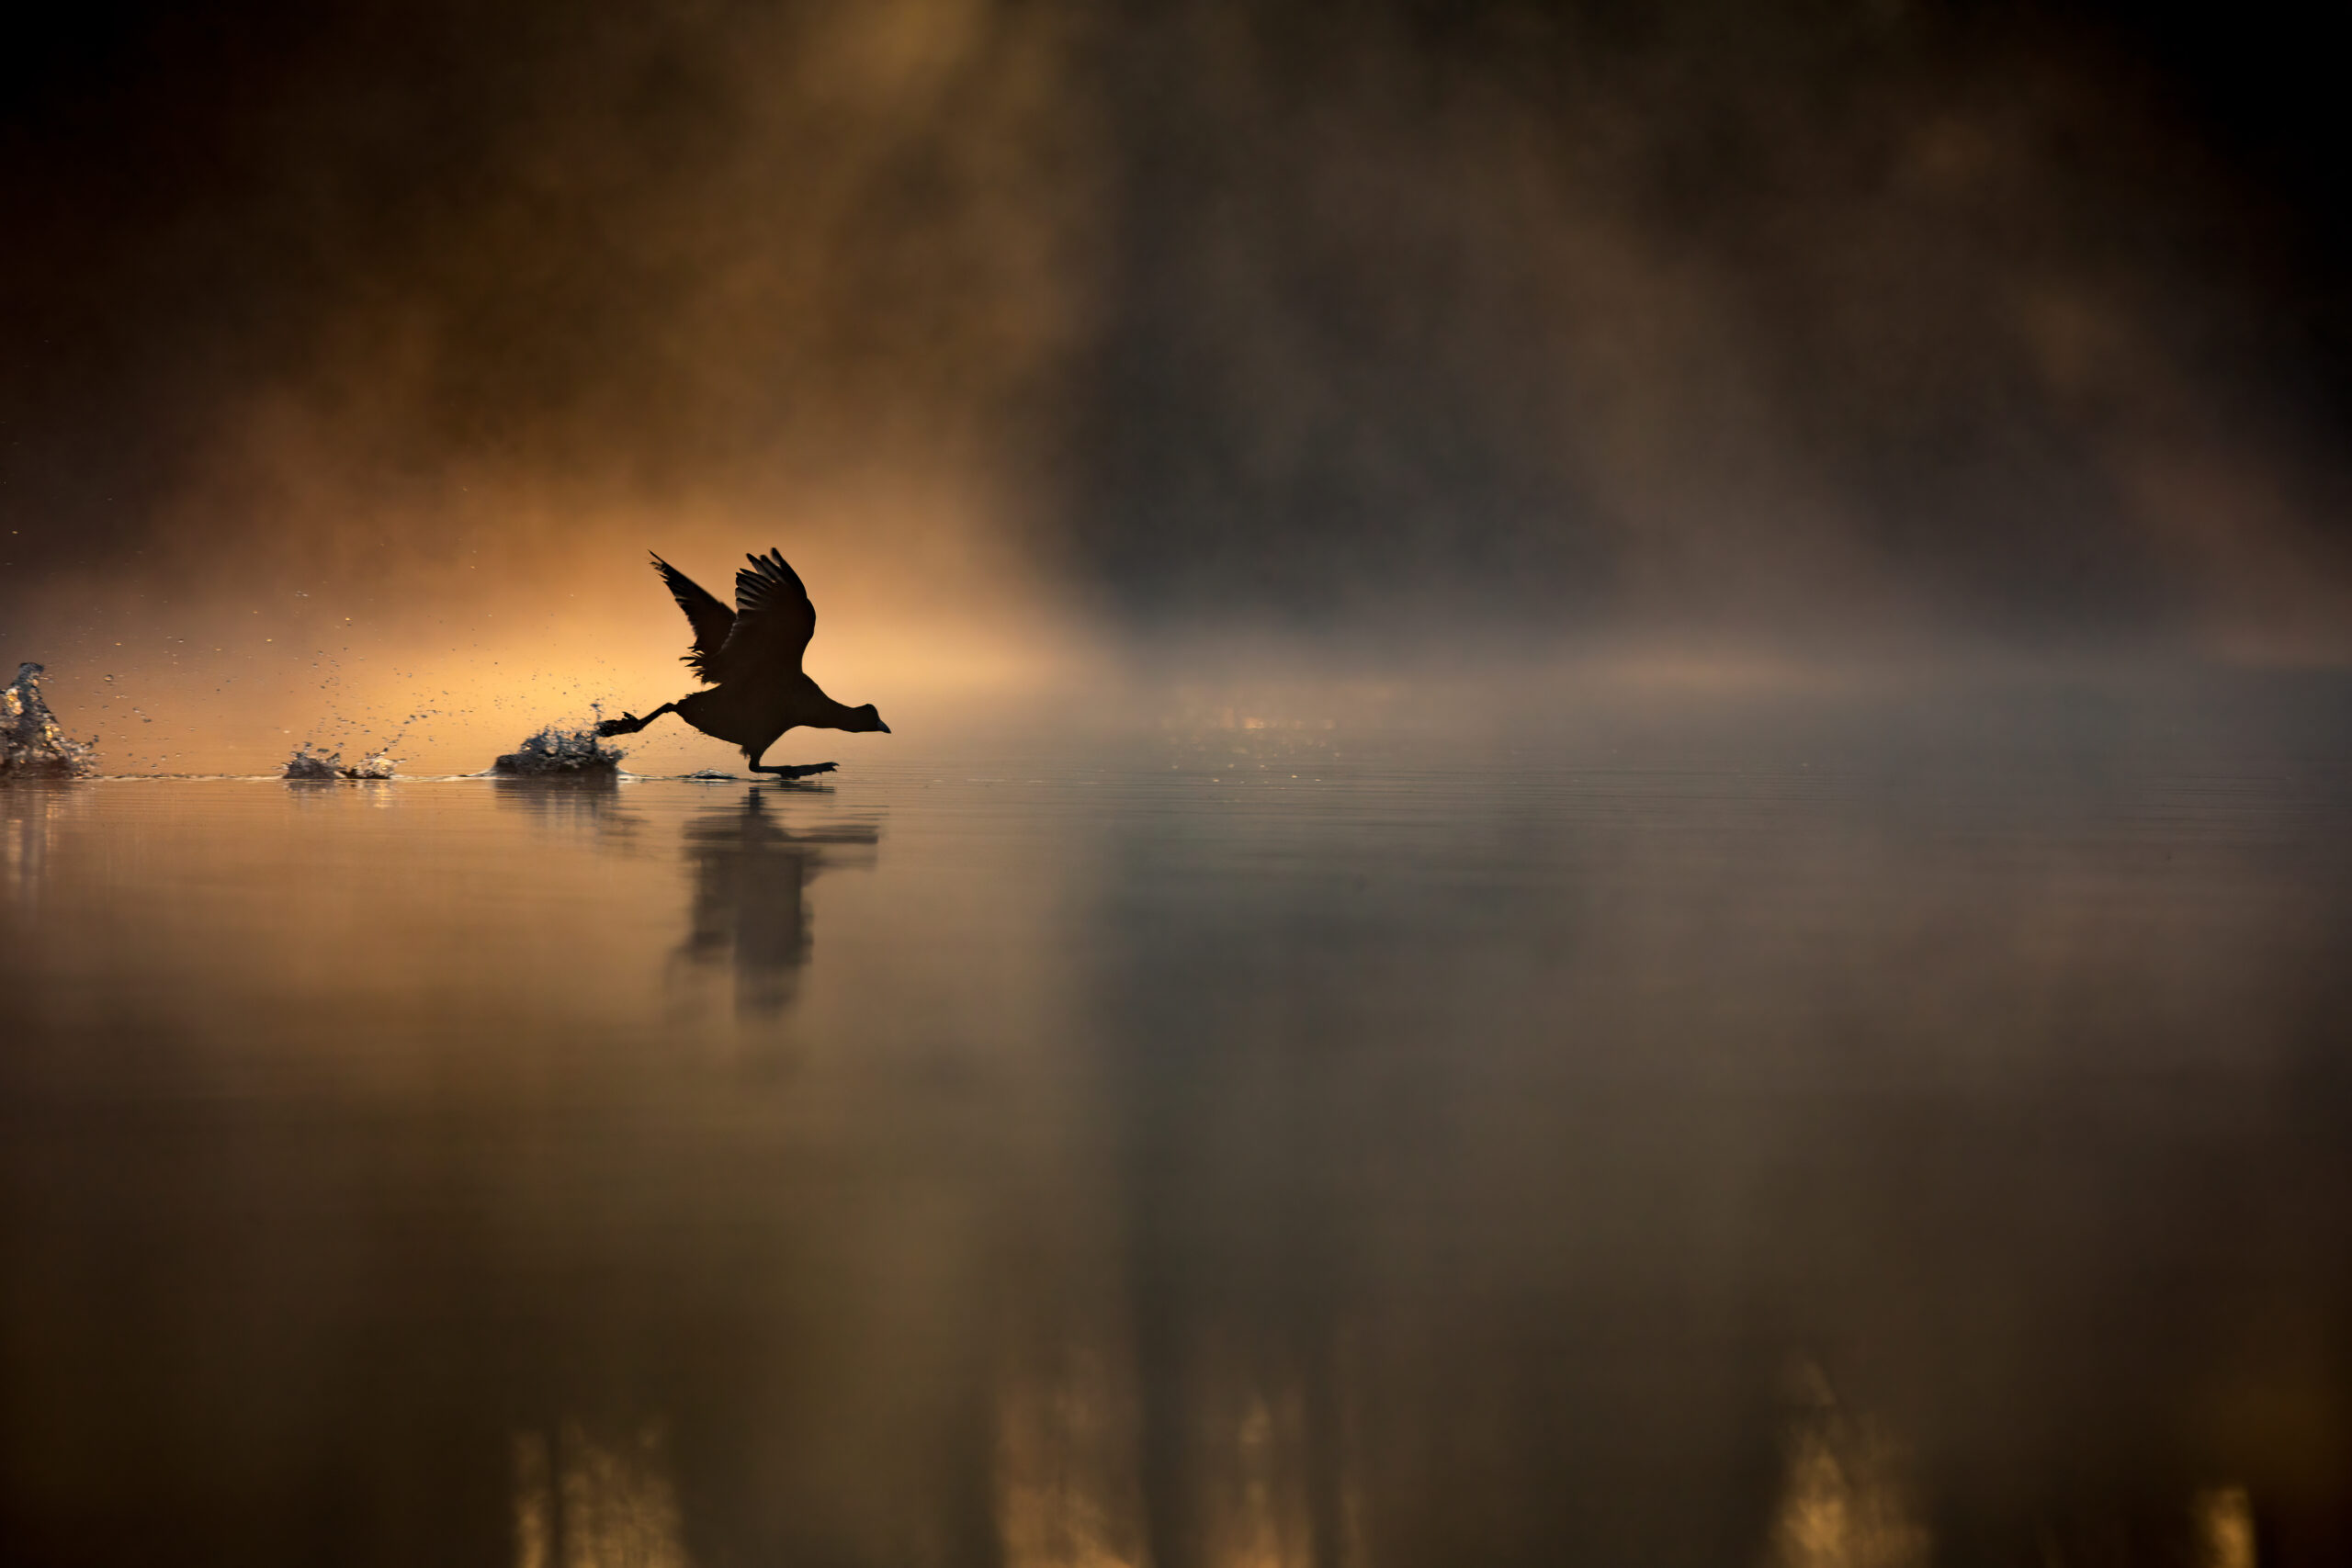 a bird is mid-flight skimming the surface of a misty pond coloured a deep orange at sunrise